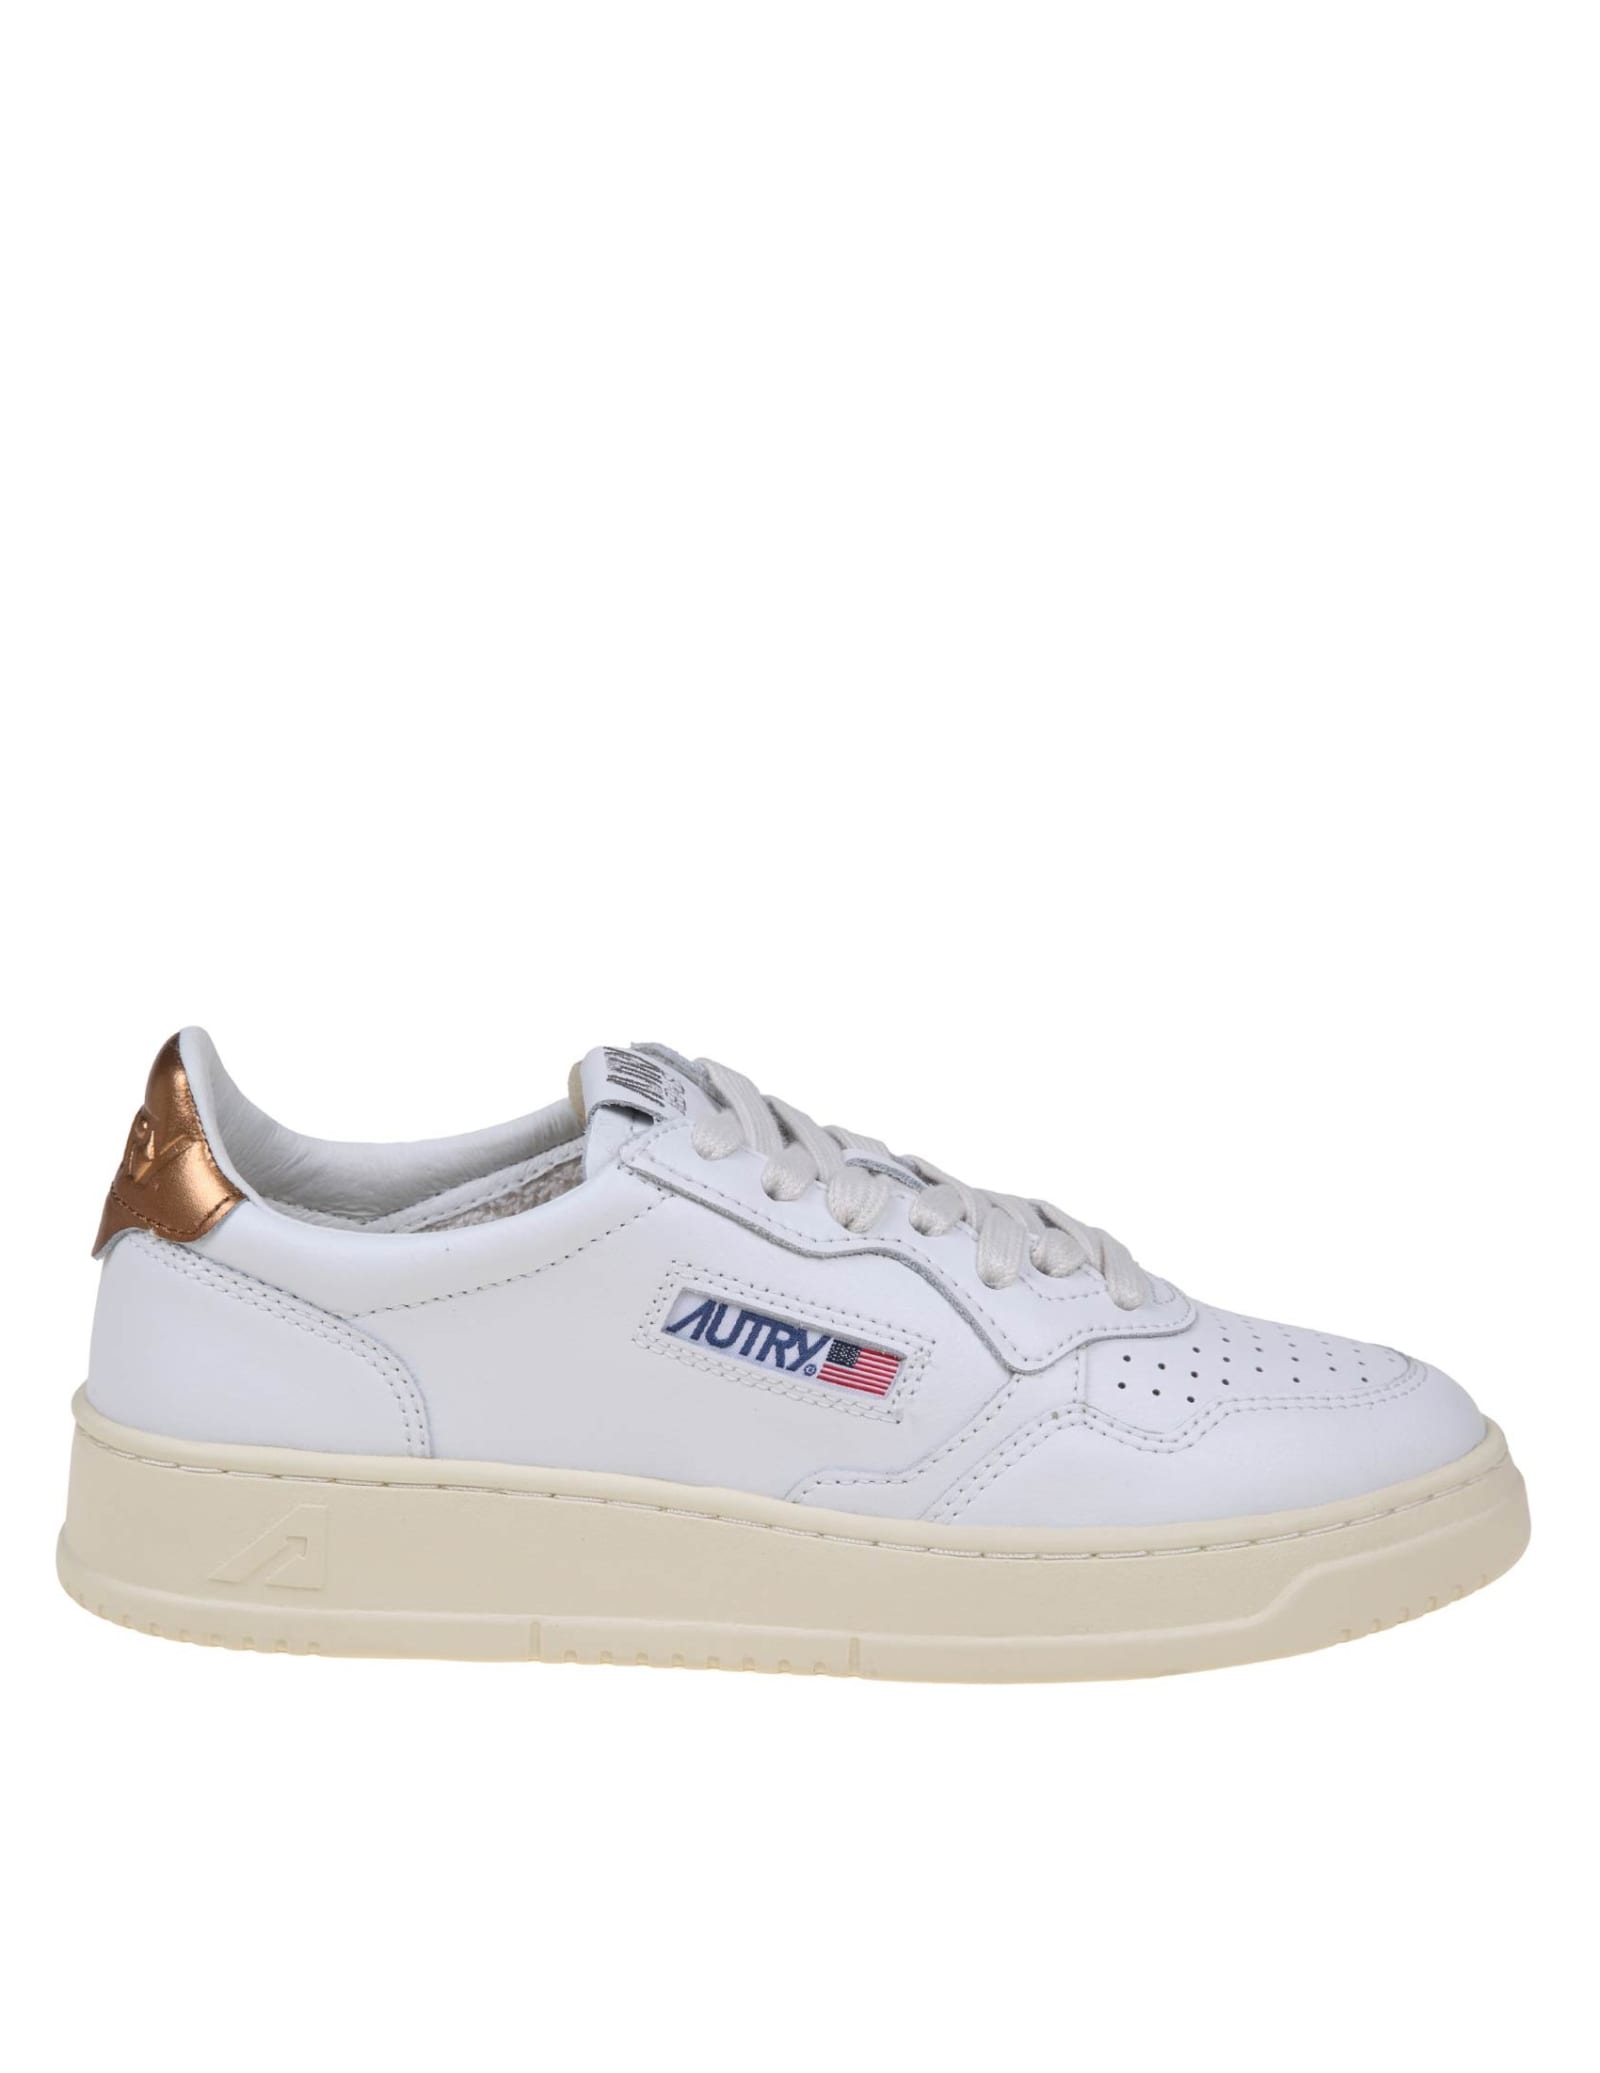 Autry Sneakers In White And Bronze Leather